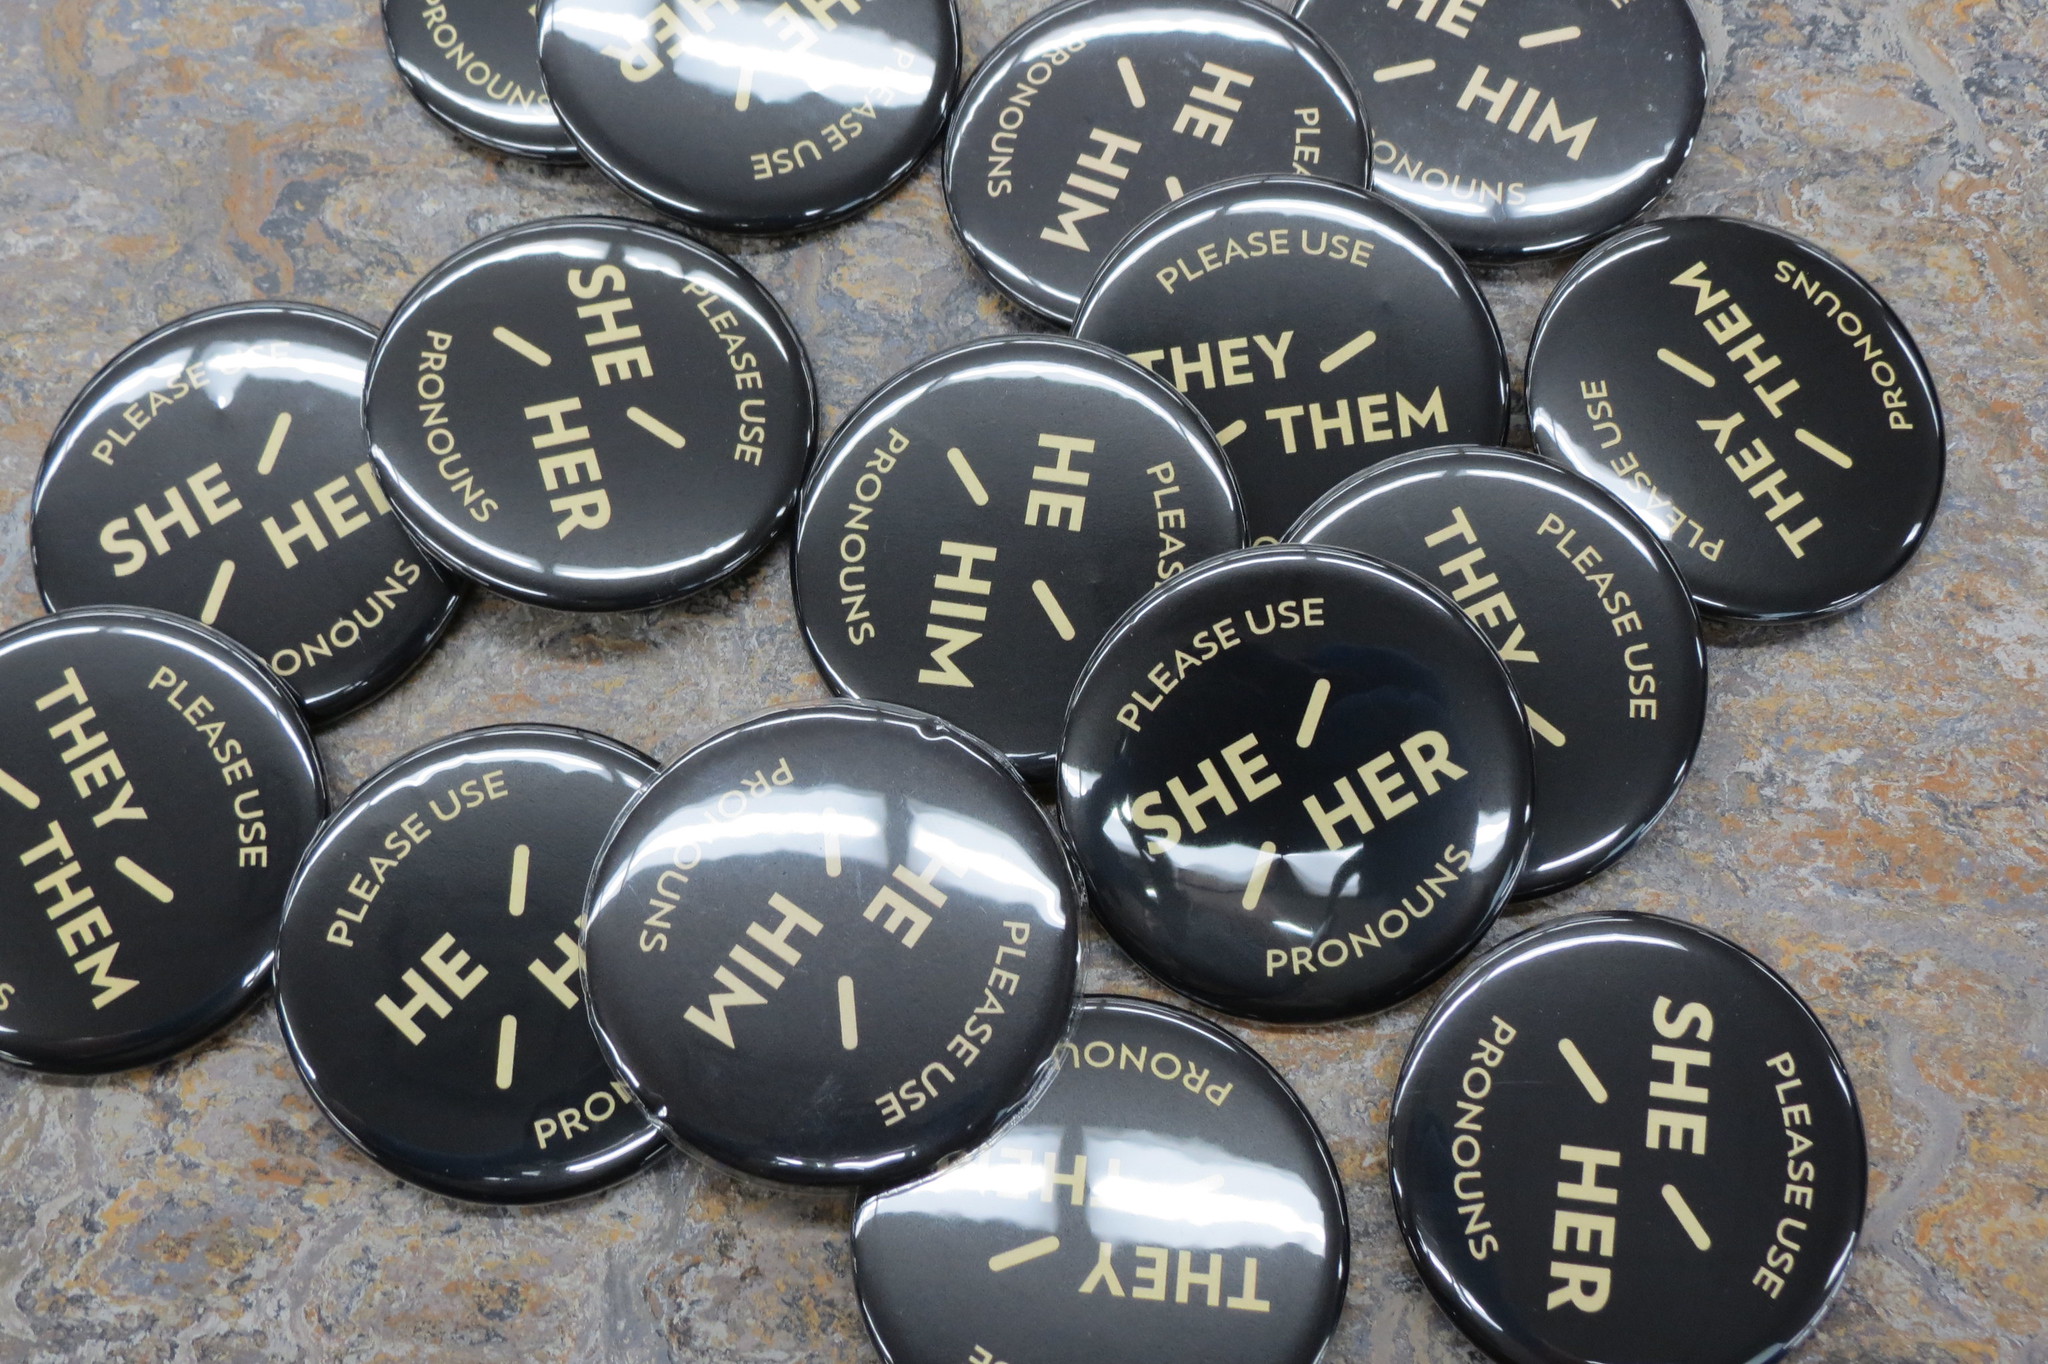 A pile of buttons with people's pronouns on them.